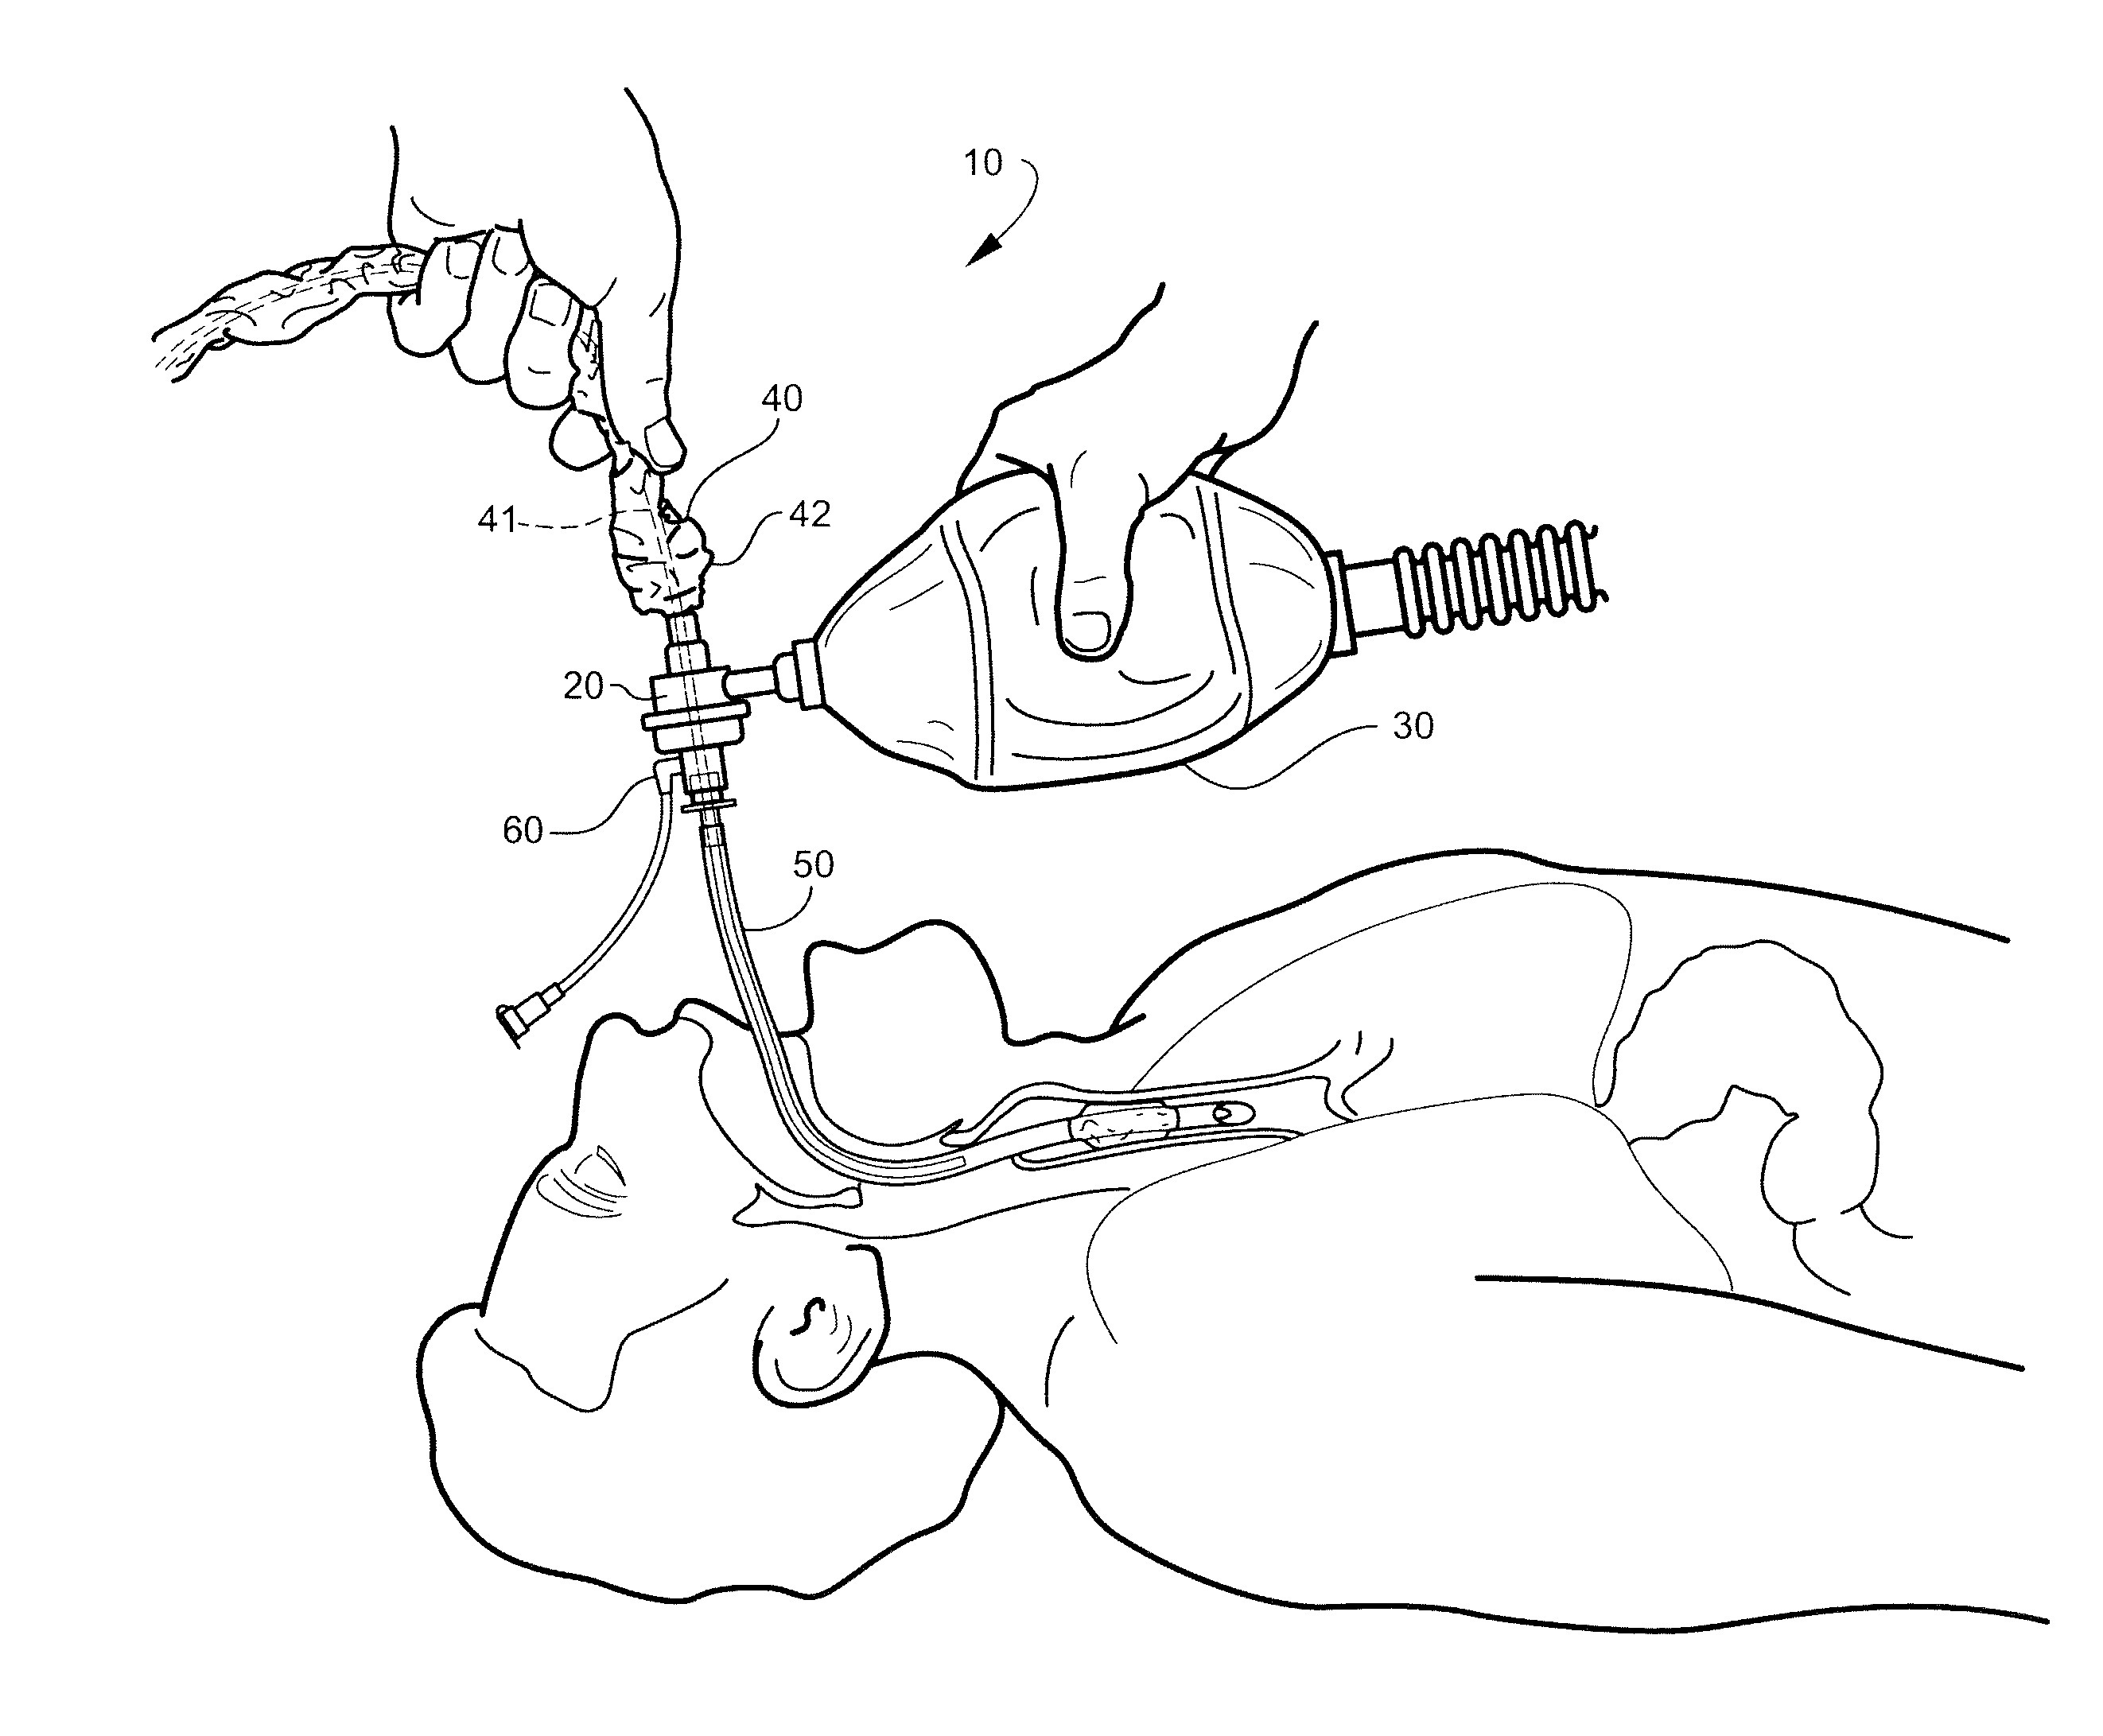 Device having manual resuscitation and suction capabilities